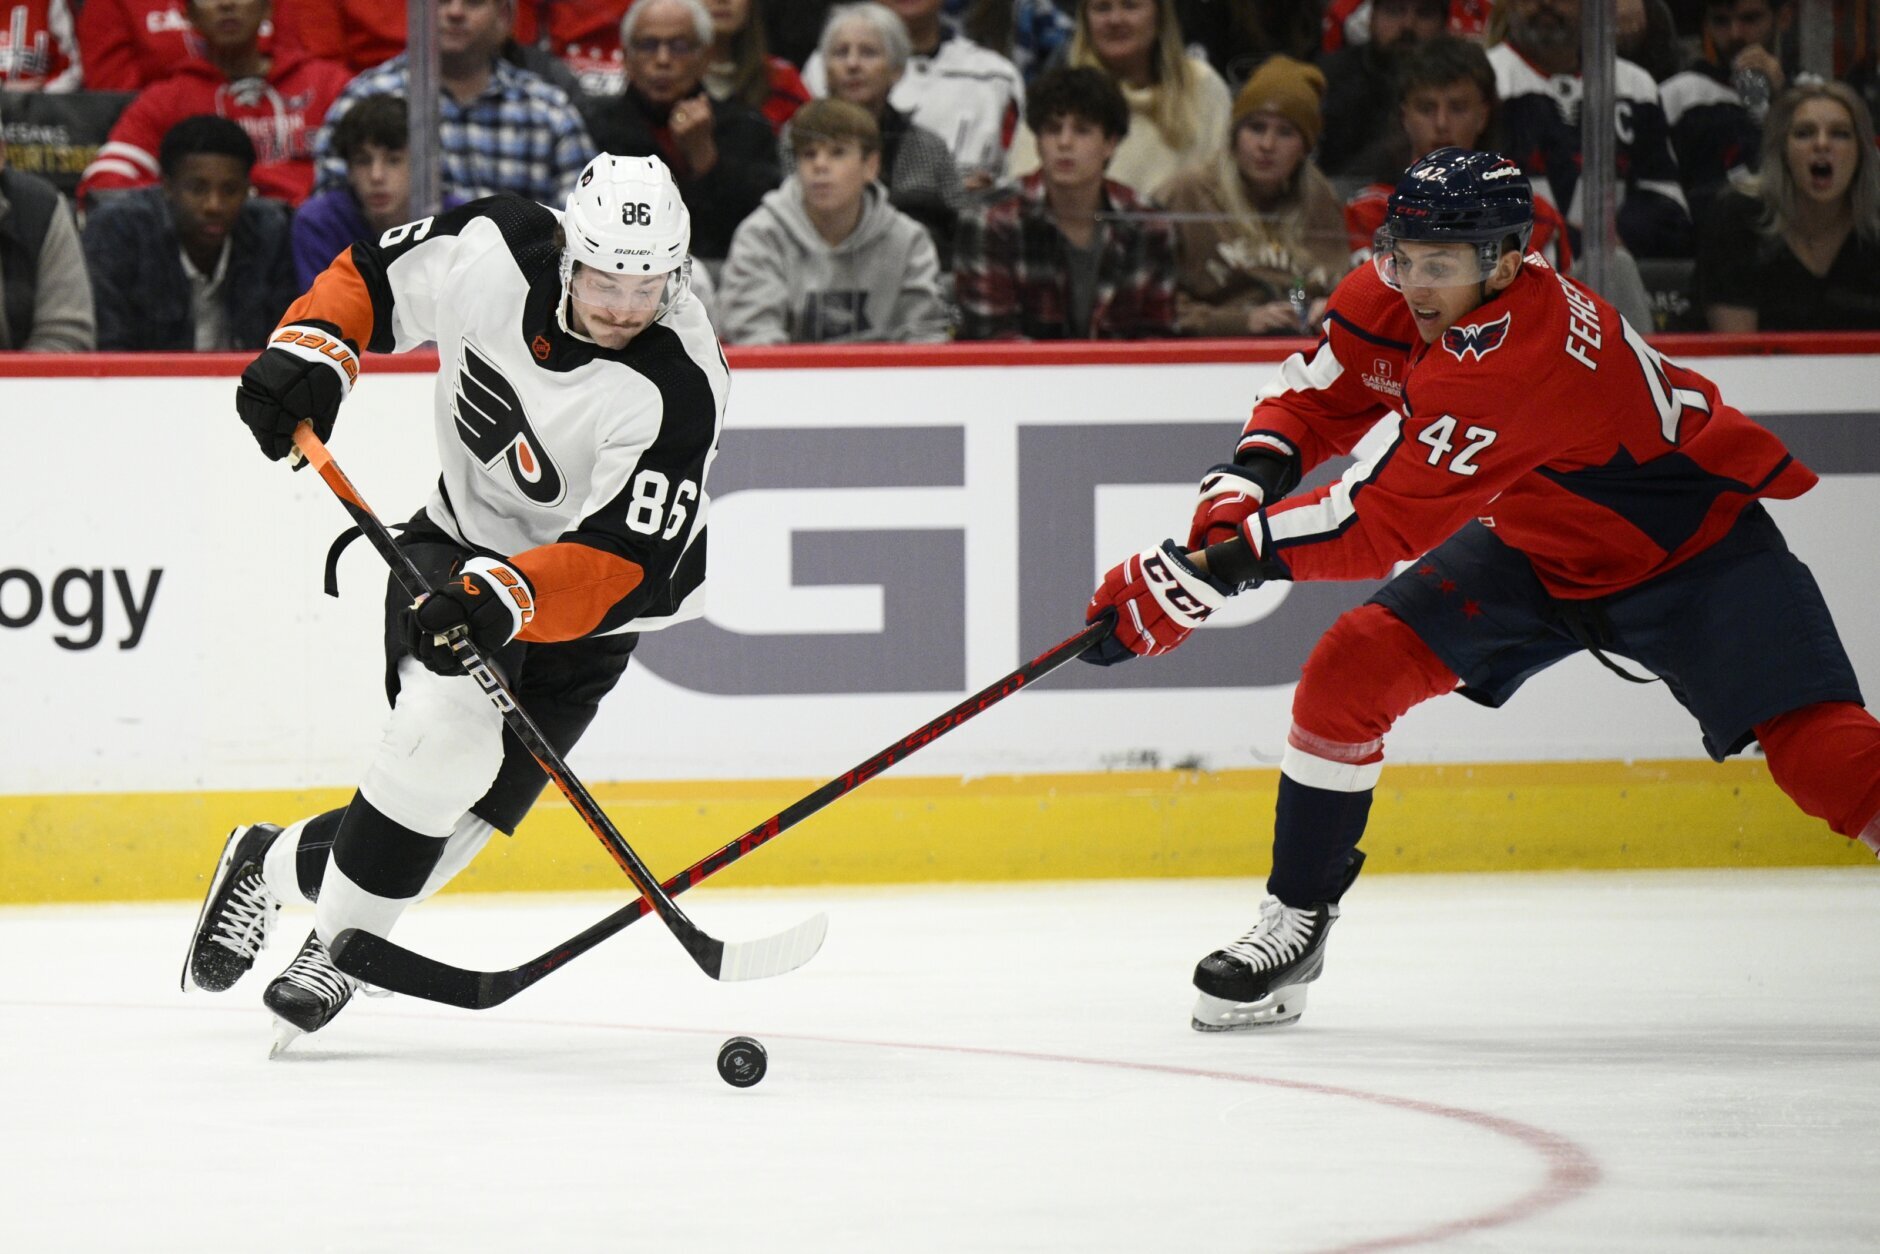 Cates' Short-Handed Goal Lifts Flyers Over Kings